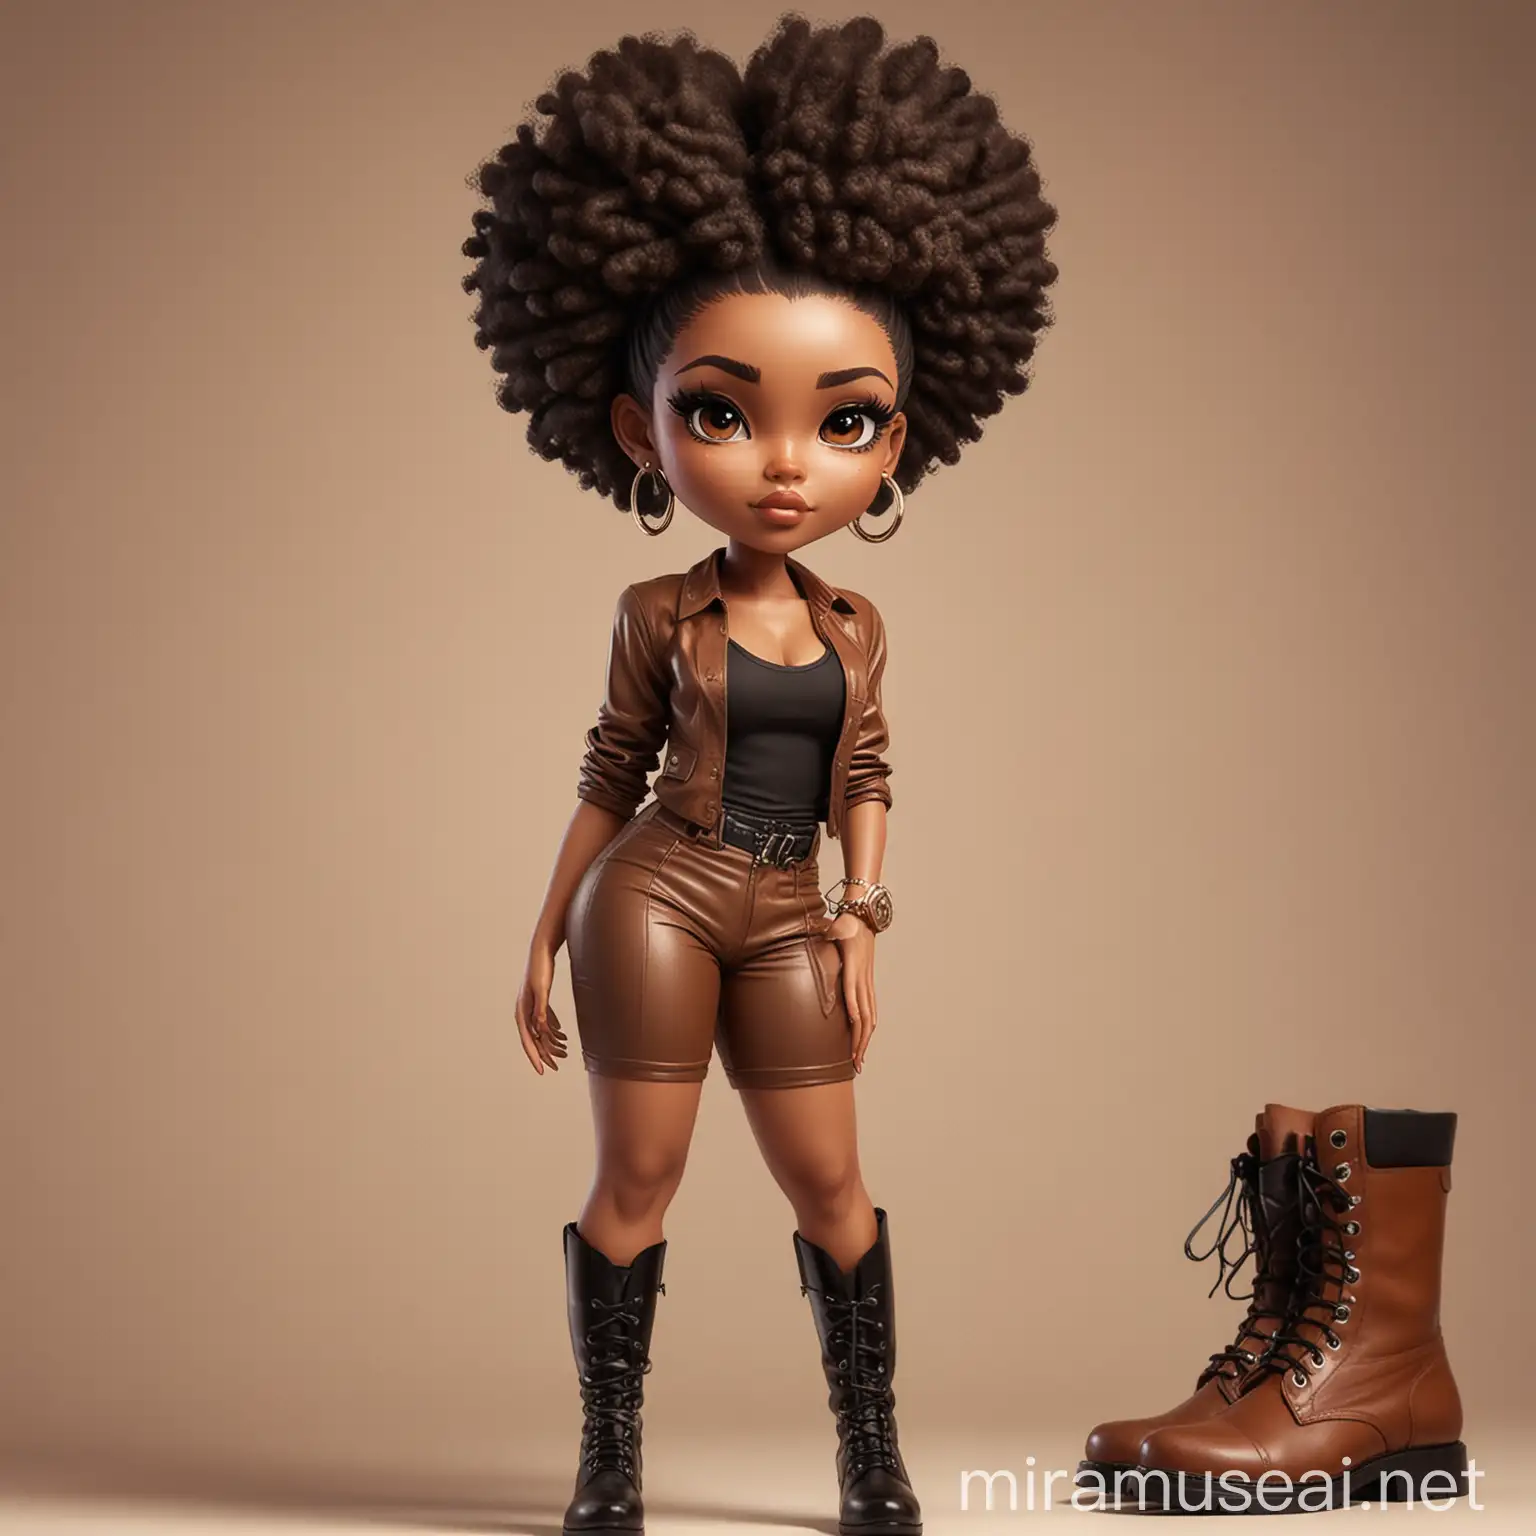 Create a absract art style image chibi image of a black female woman with afro bun, black silky and brown eyes. boss babe, Long eye lashes, full length, dressed in luxury suit with tank top, boots, face close up